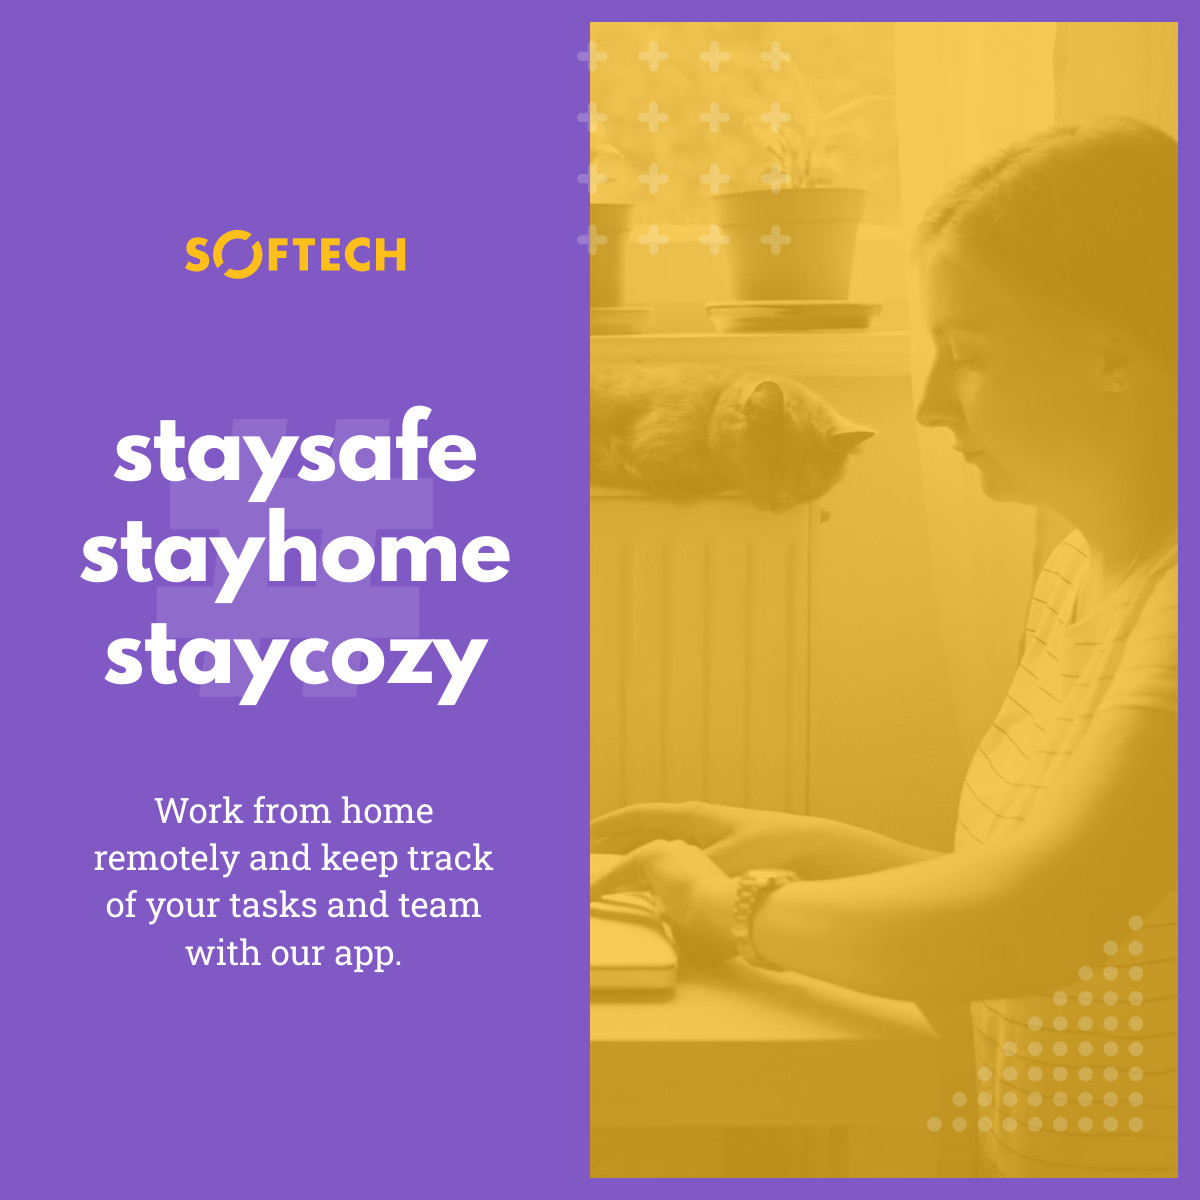 Softech Stayhome Staysafe Stacozy Video Facebook Video Cover 1250x463